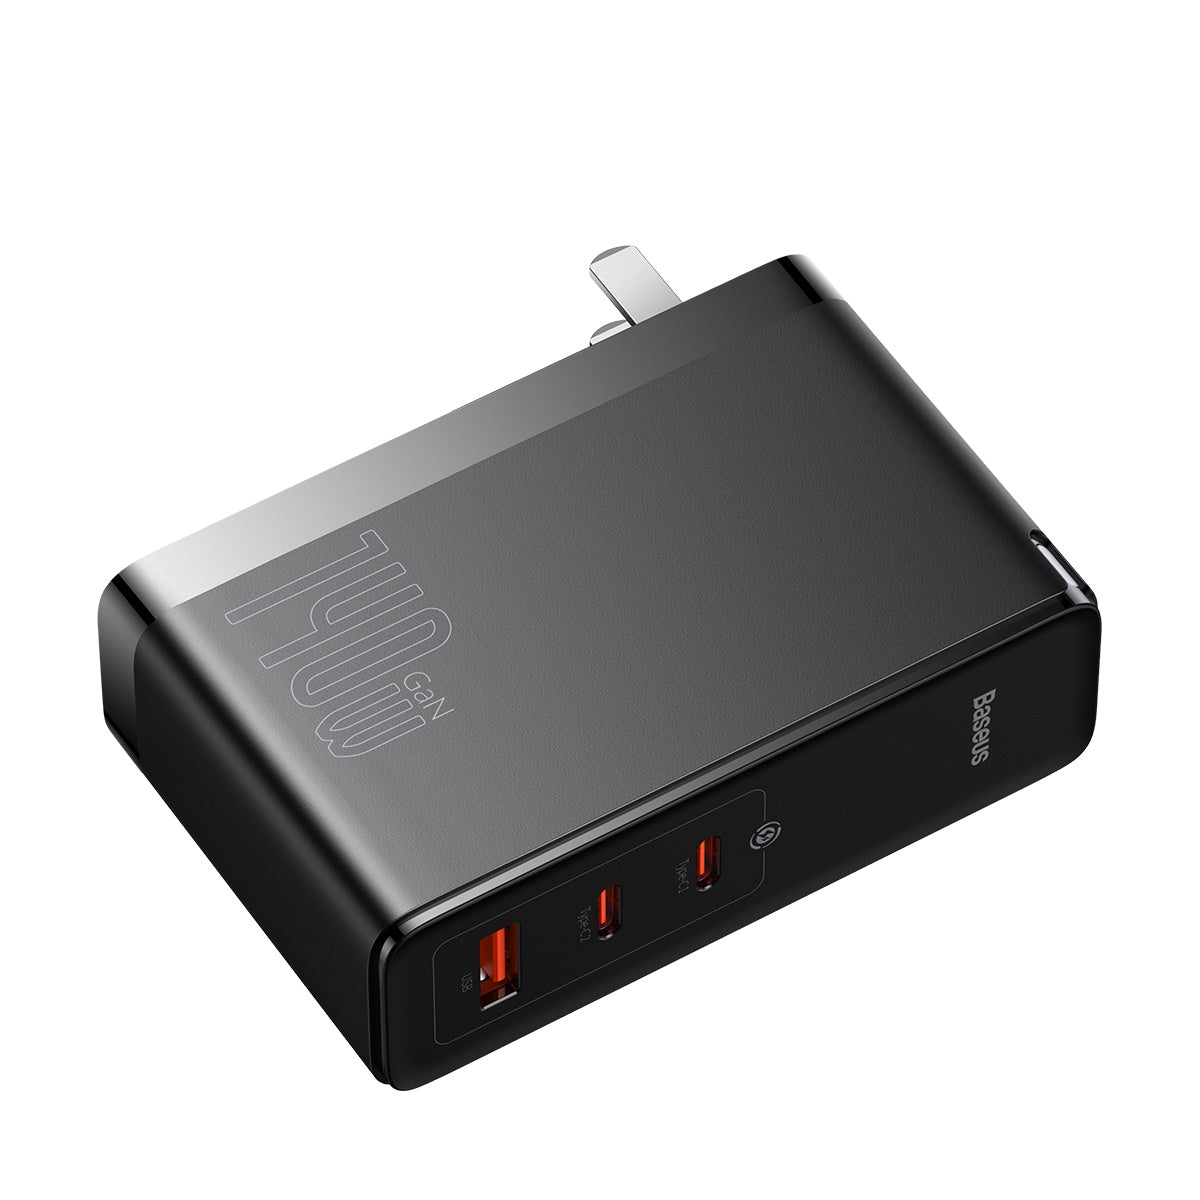 Baseus GaN5 Pro 140W 2Type-C+1USB Port Fast Charger (With Superior Series Cable C to C 240W 1M)